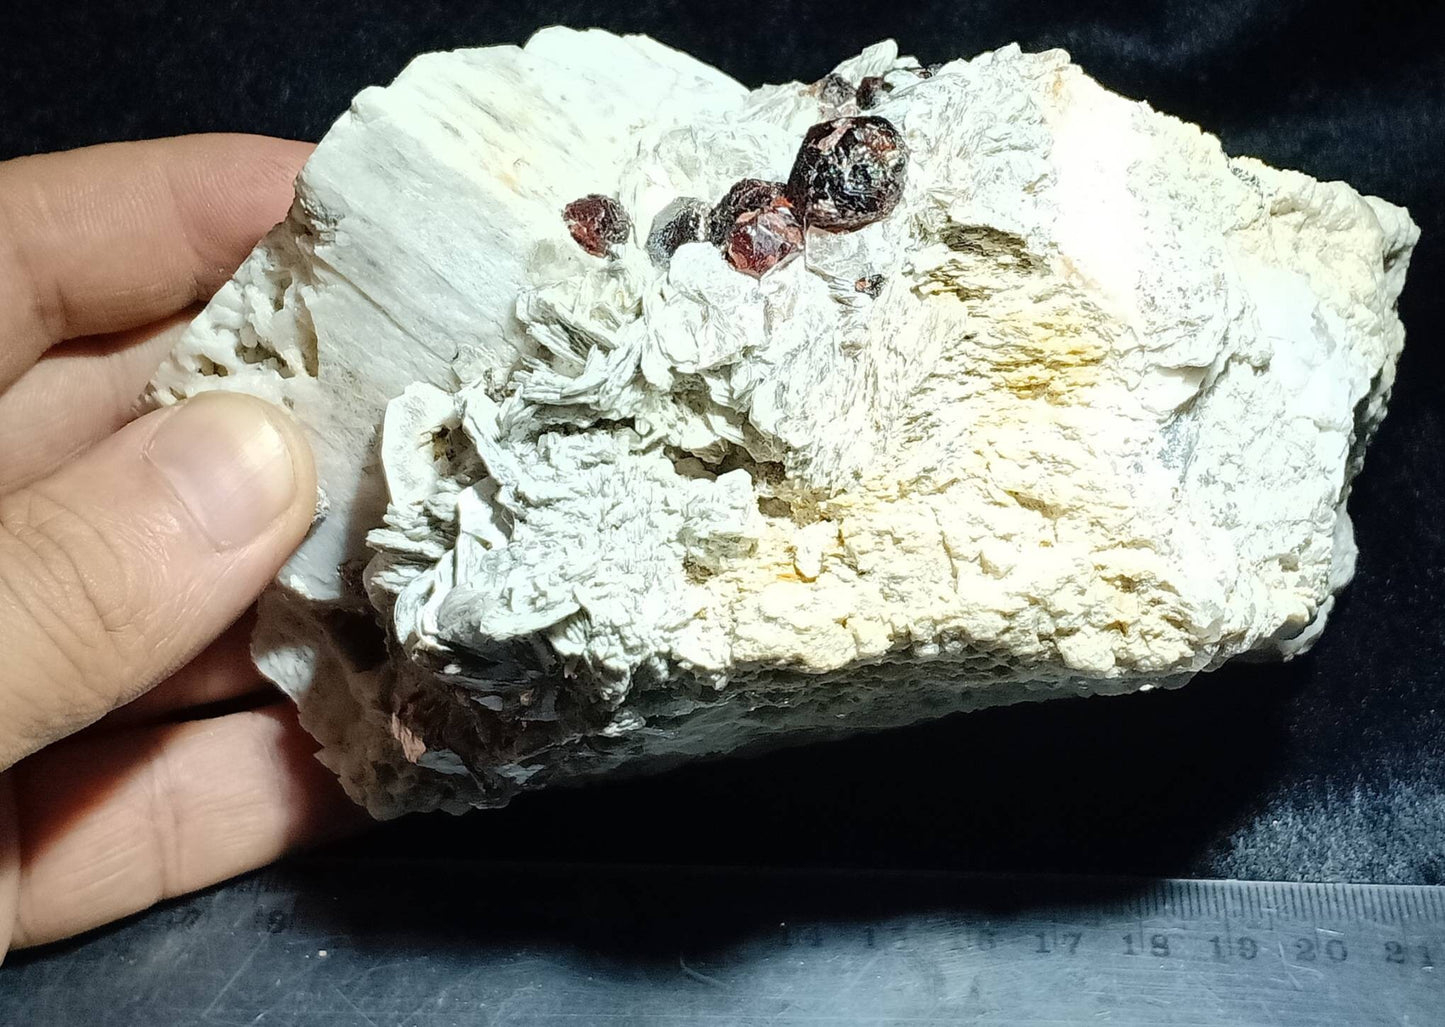 An amazing beautifully terminated specimen of spessartine Garnet crystals on matrix with Feldspar and mica 971 grams